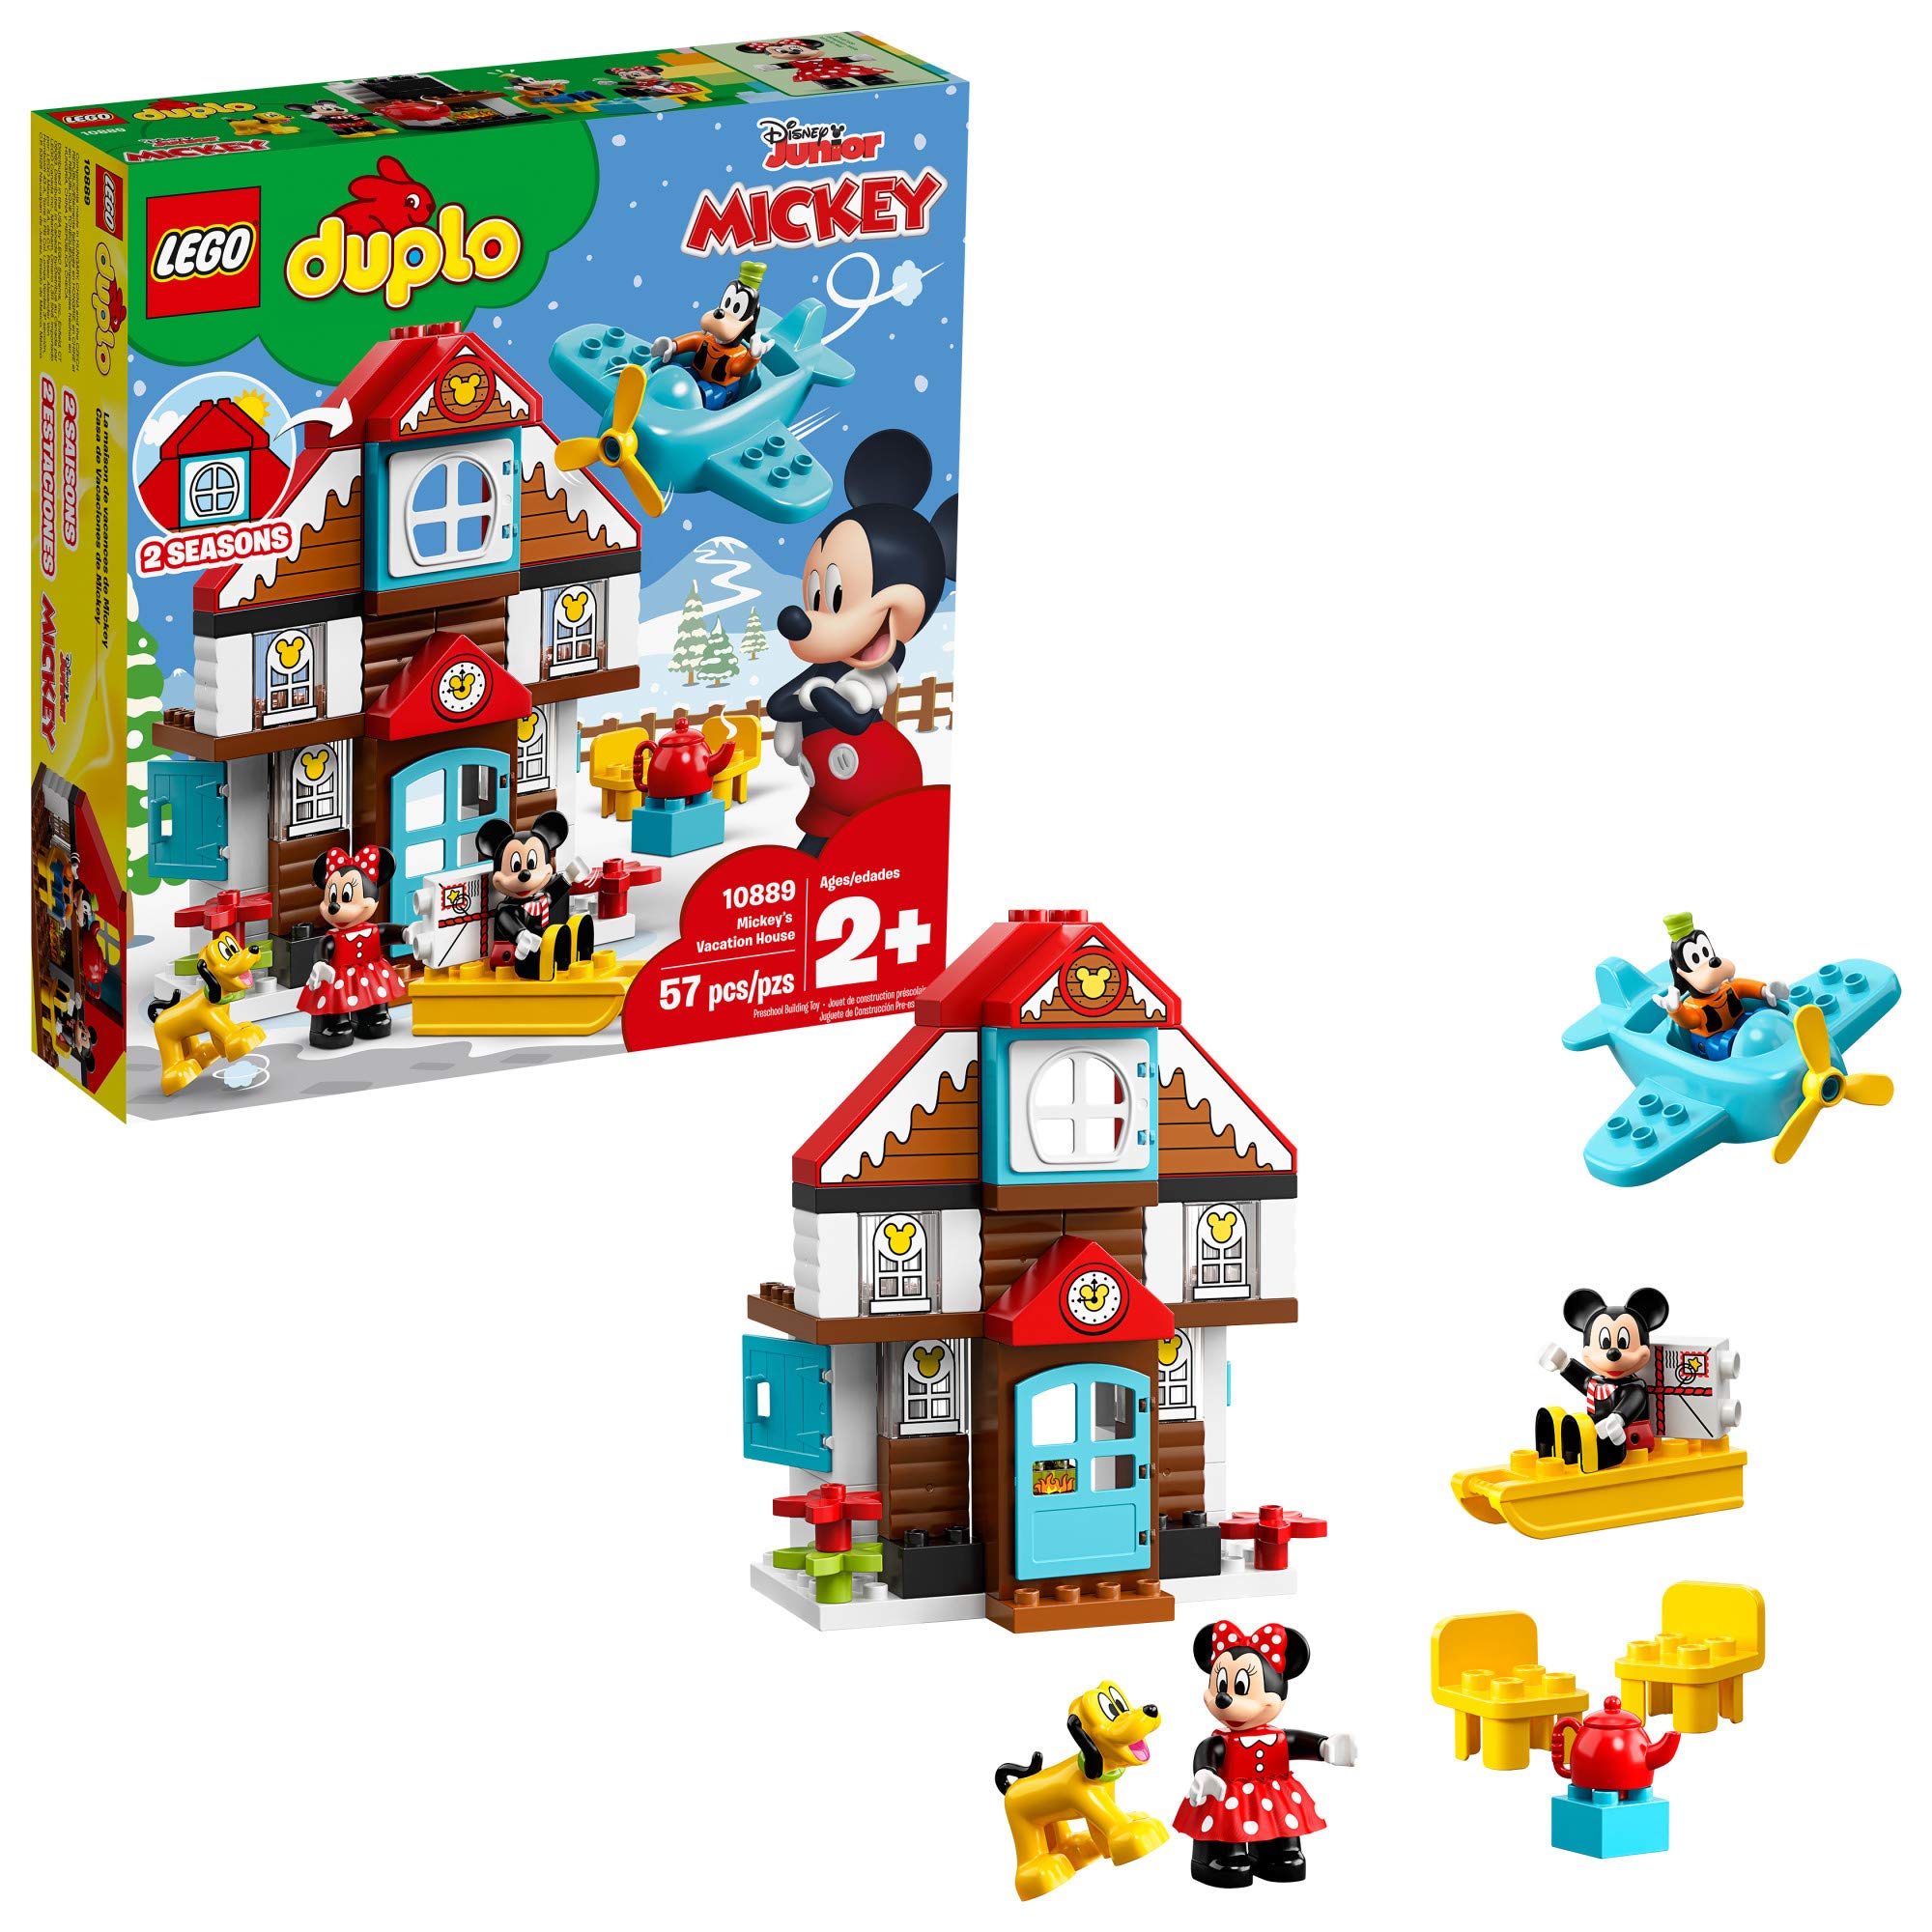 toy house building set